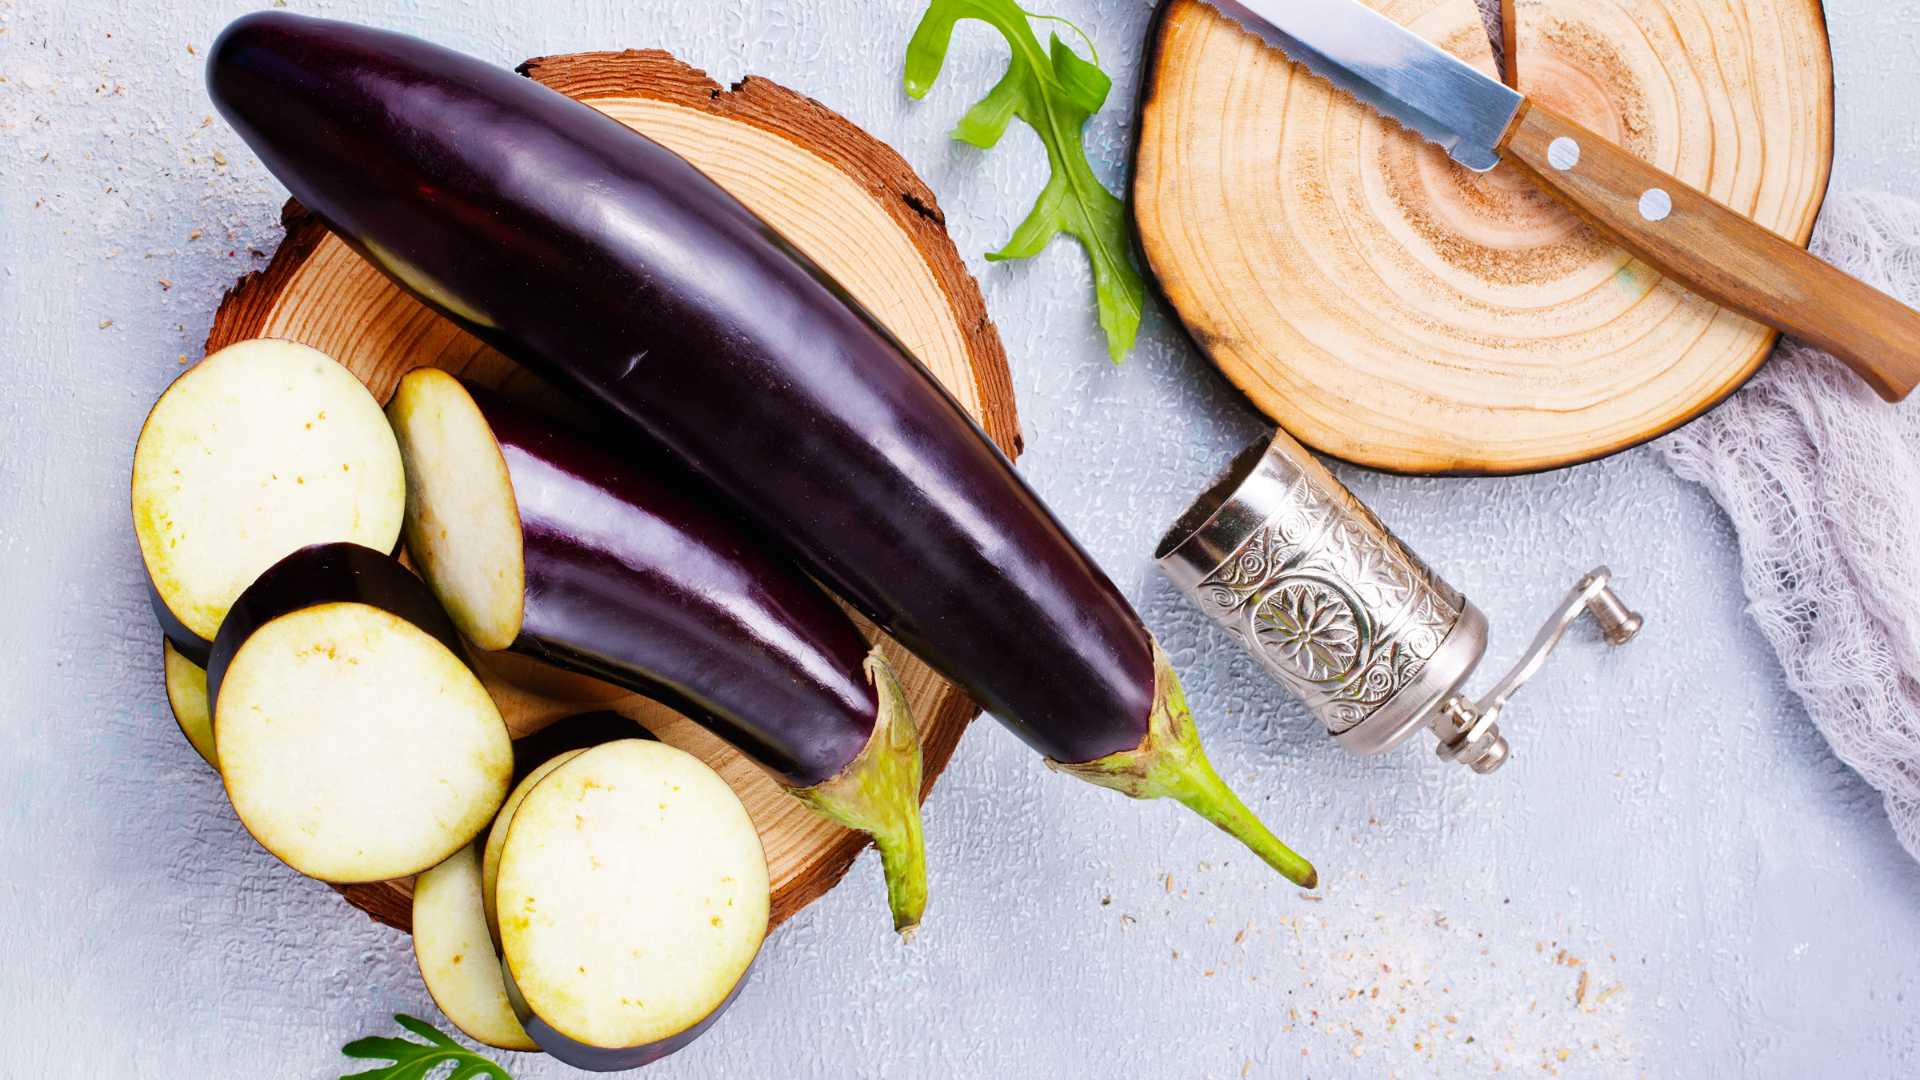 Eggplant Side Dishes for a Hearty and Filling Meal